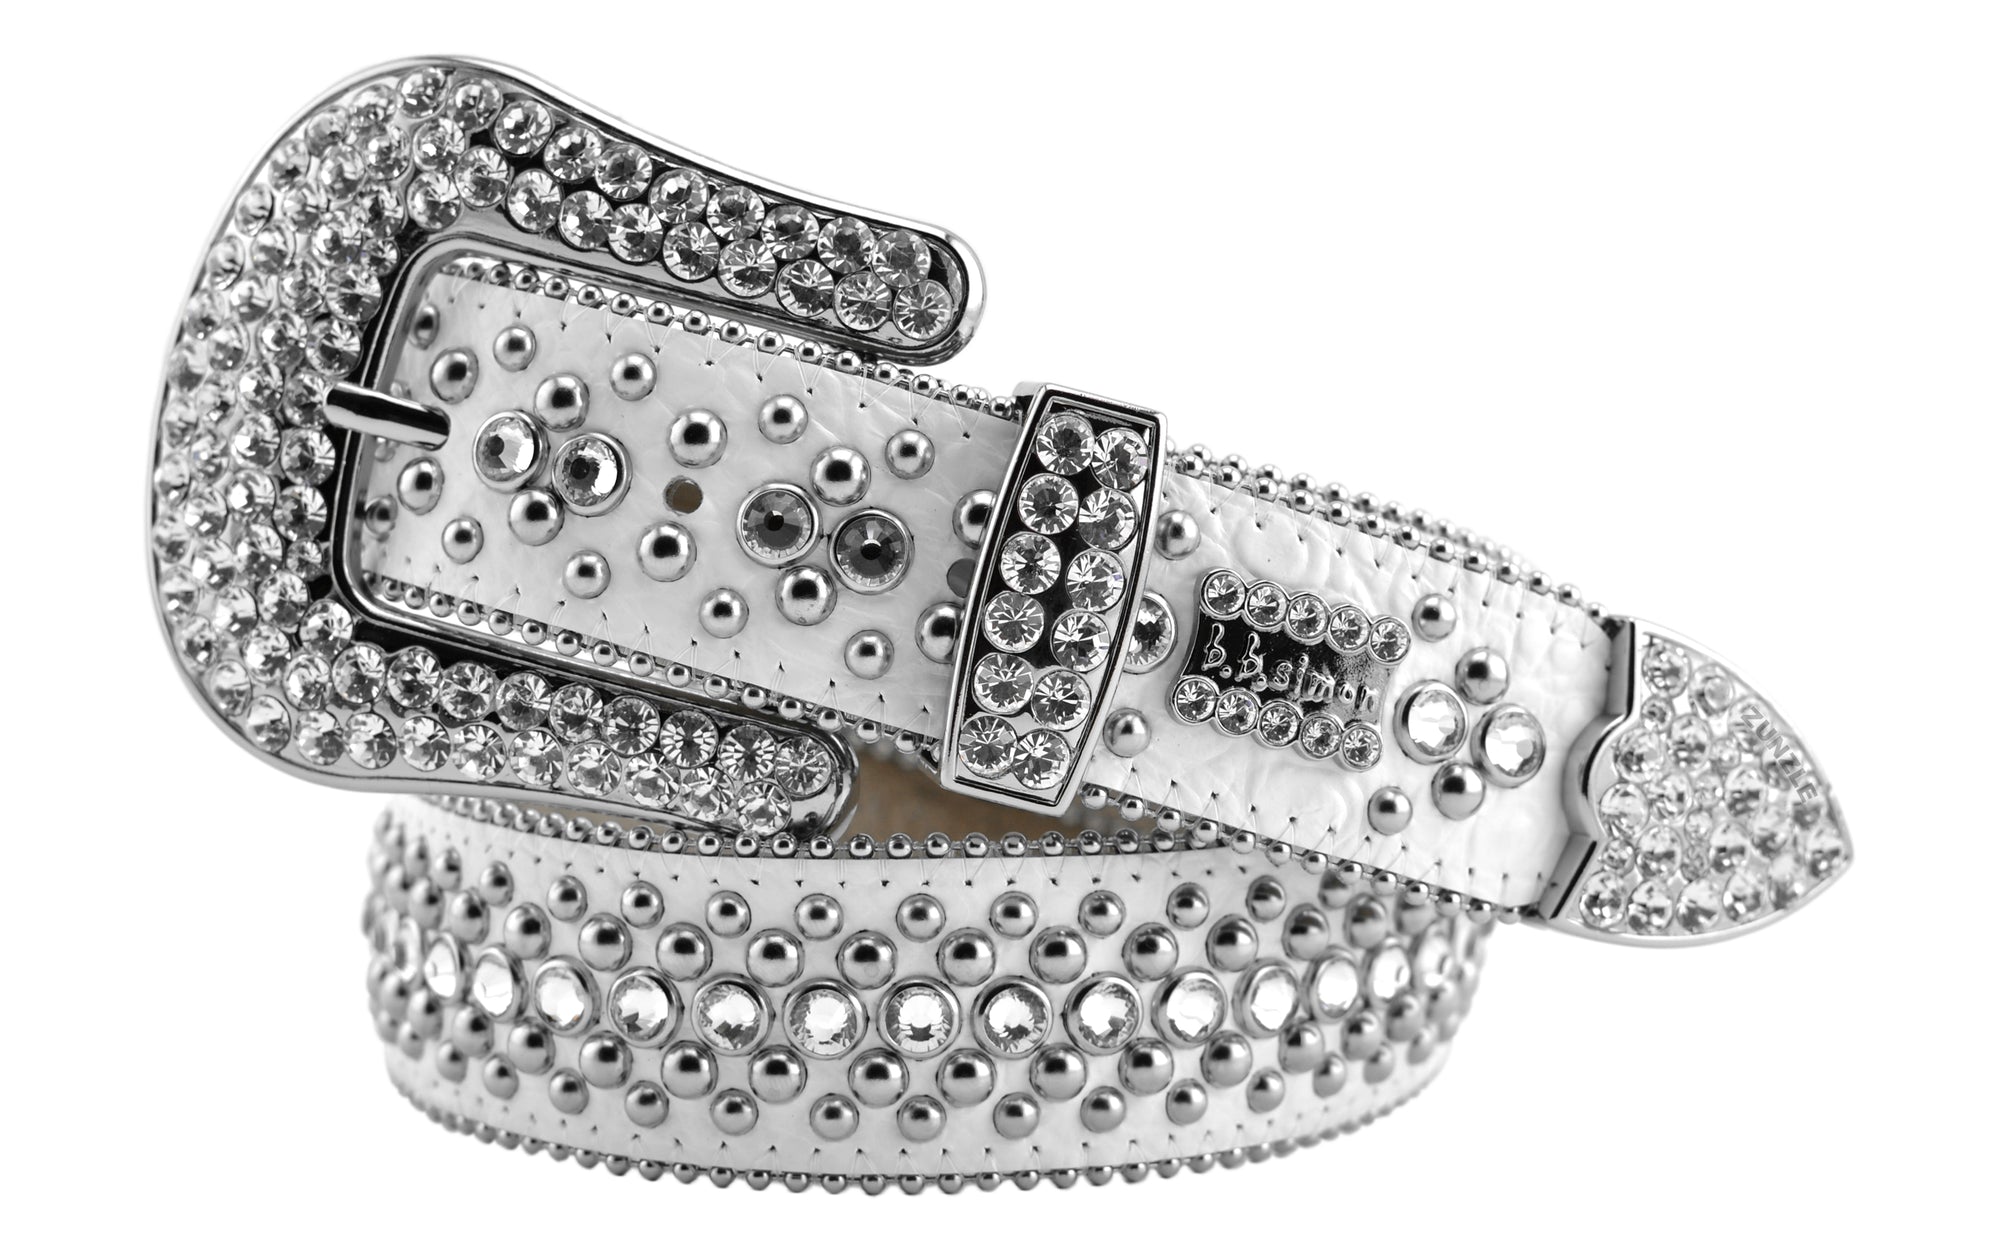 Mens b.b. simon white kish belt with clear ice crystals and silver finish